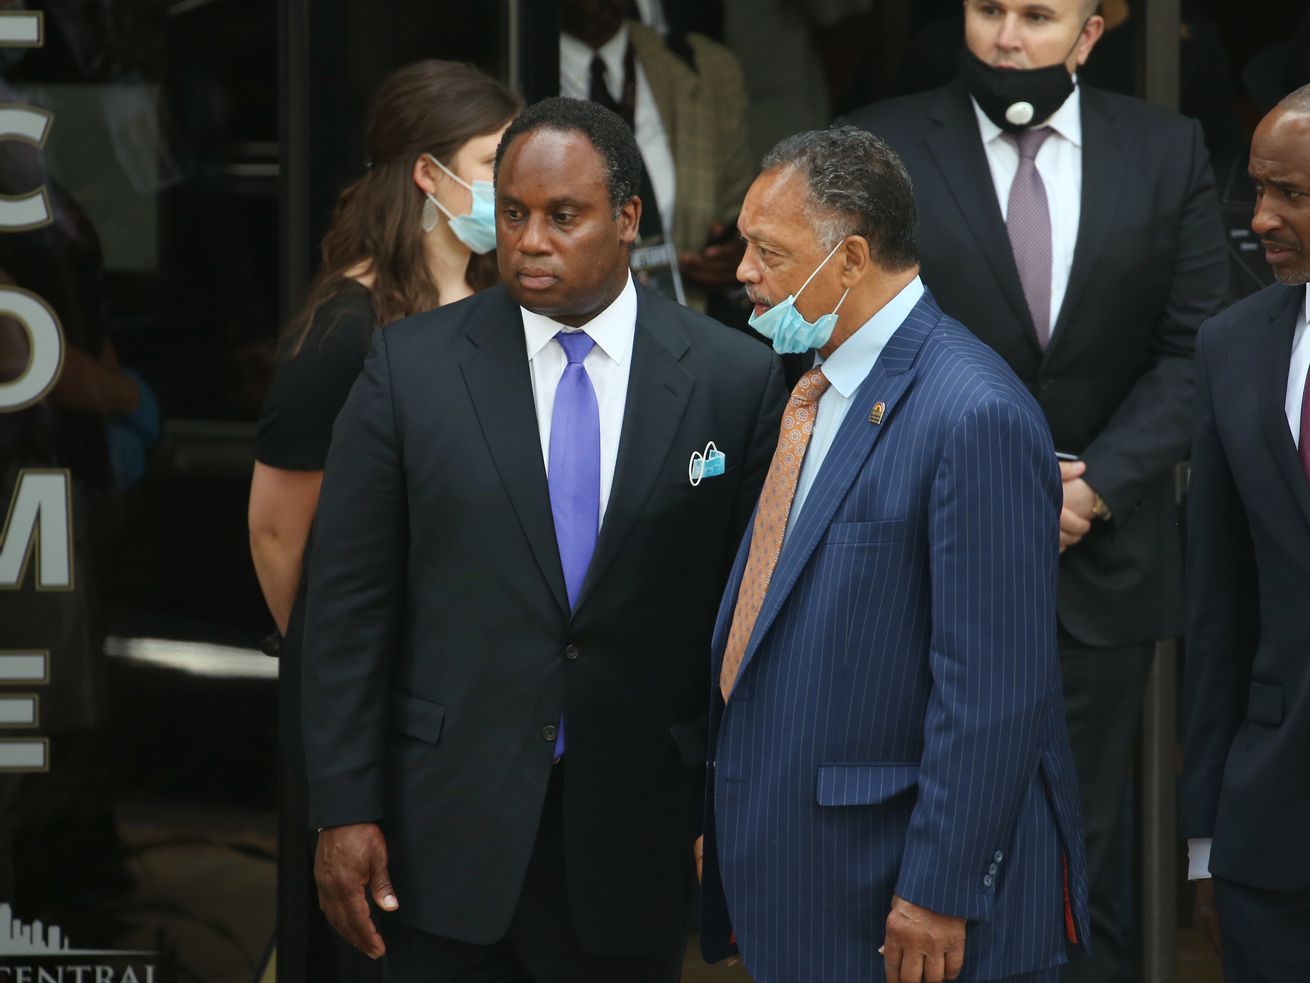 The Rev. Jesse Jackson leaves the Trask Worship Center with his son Jonathan following a memorial service for George Floyd in Minneapolis in June 2020.